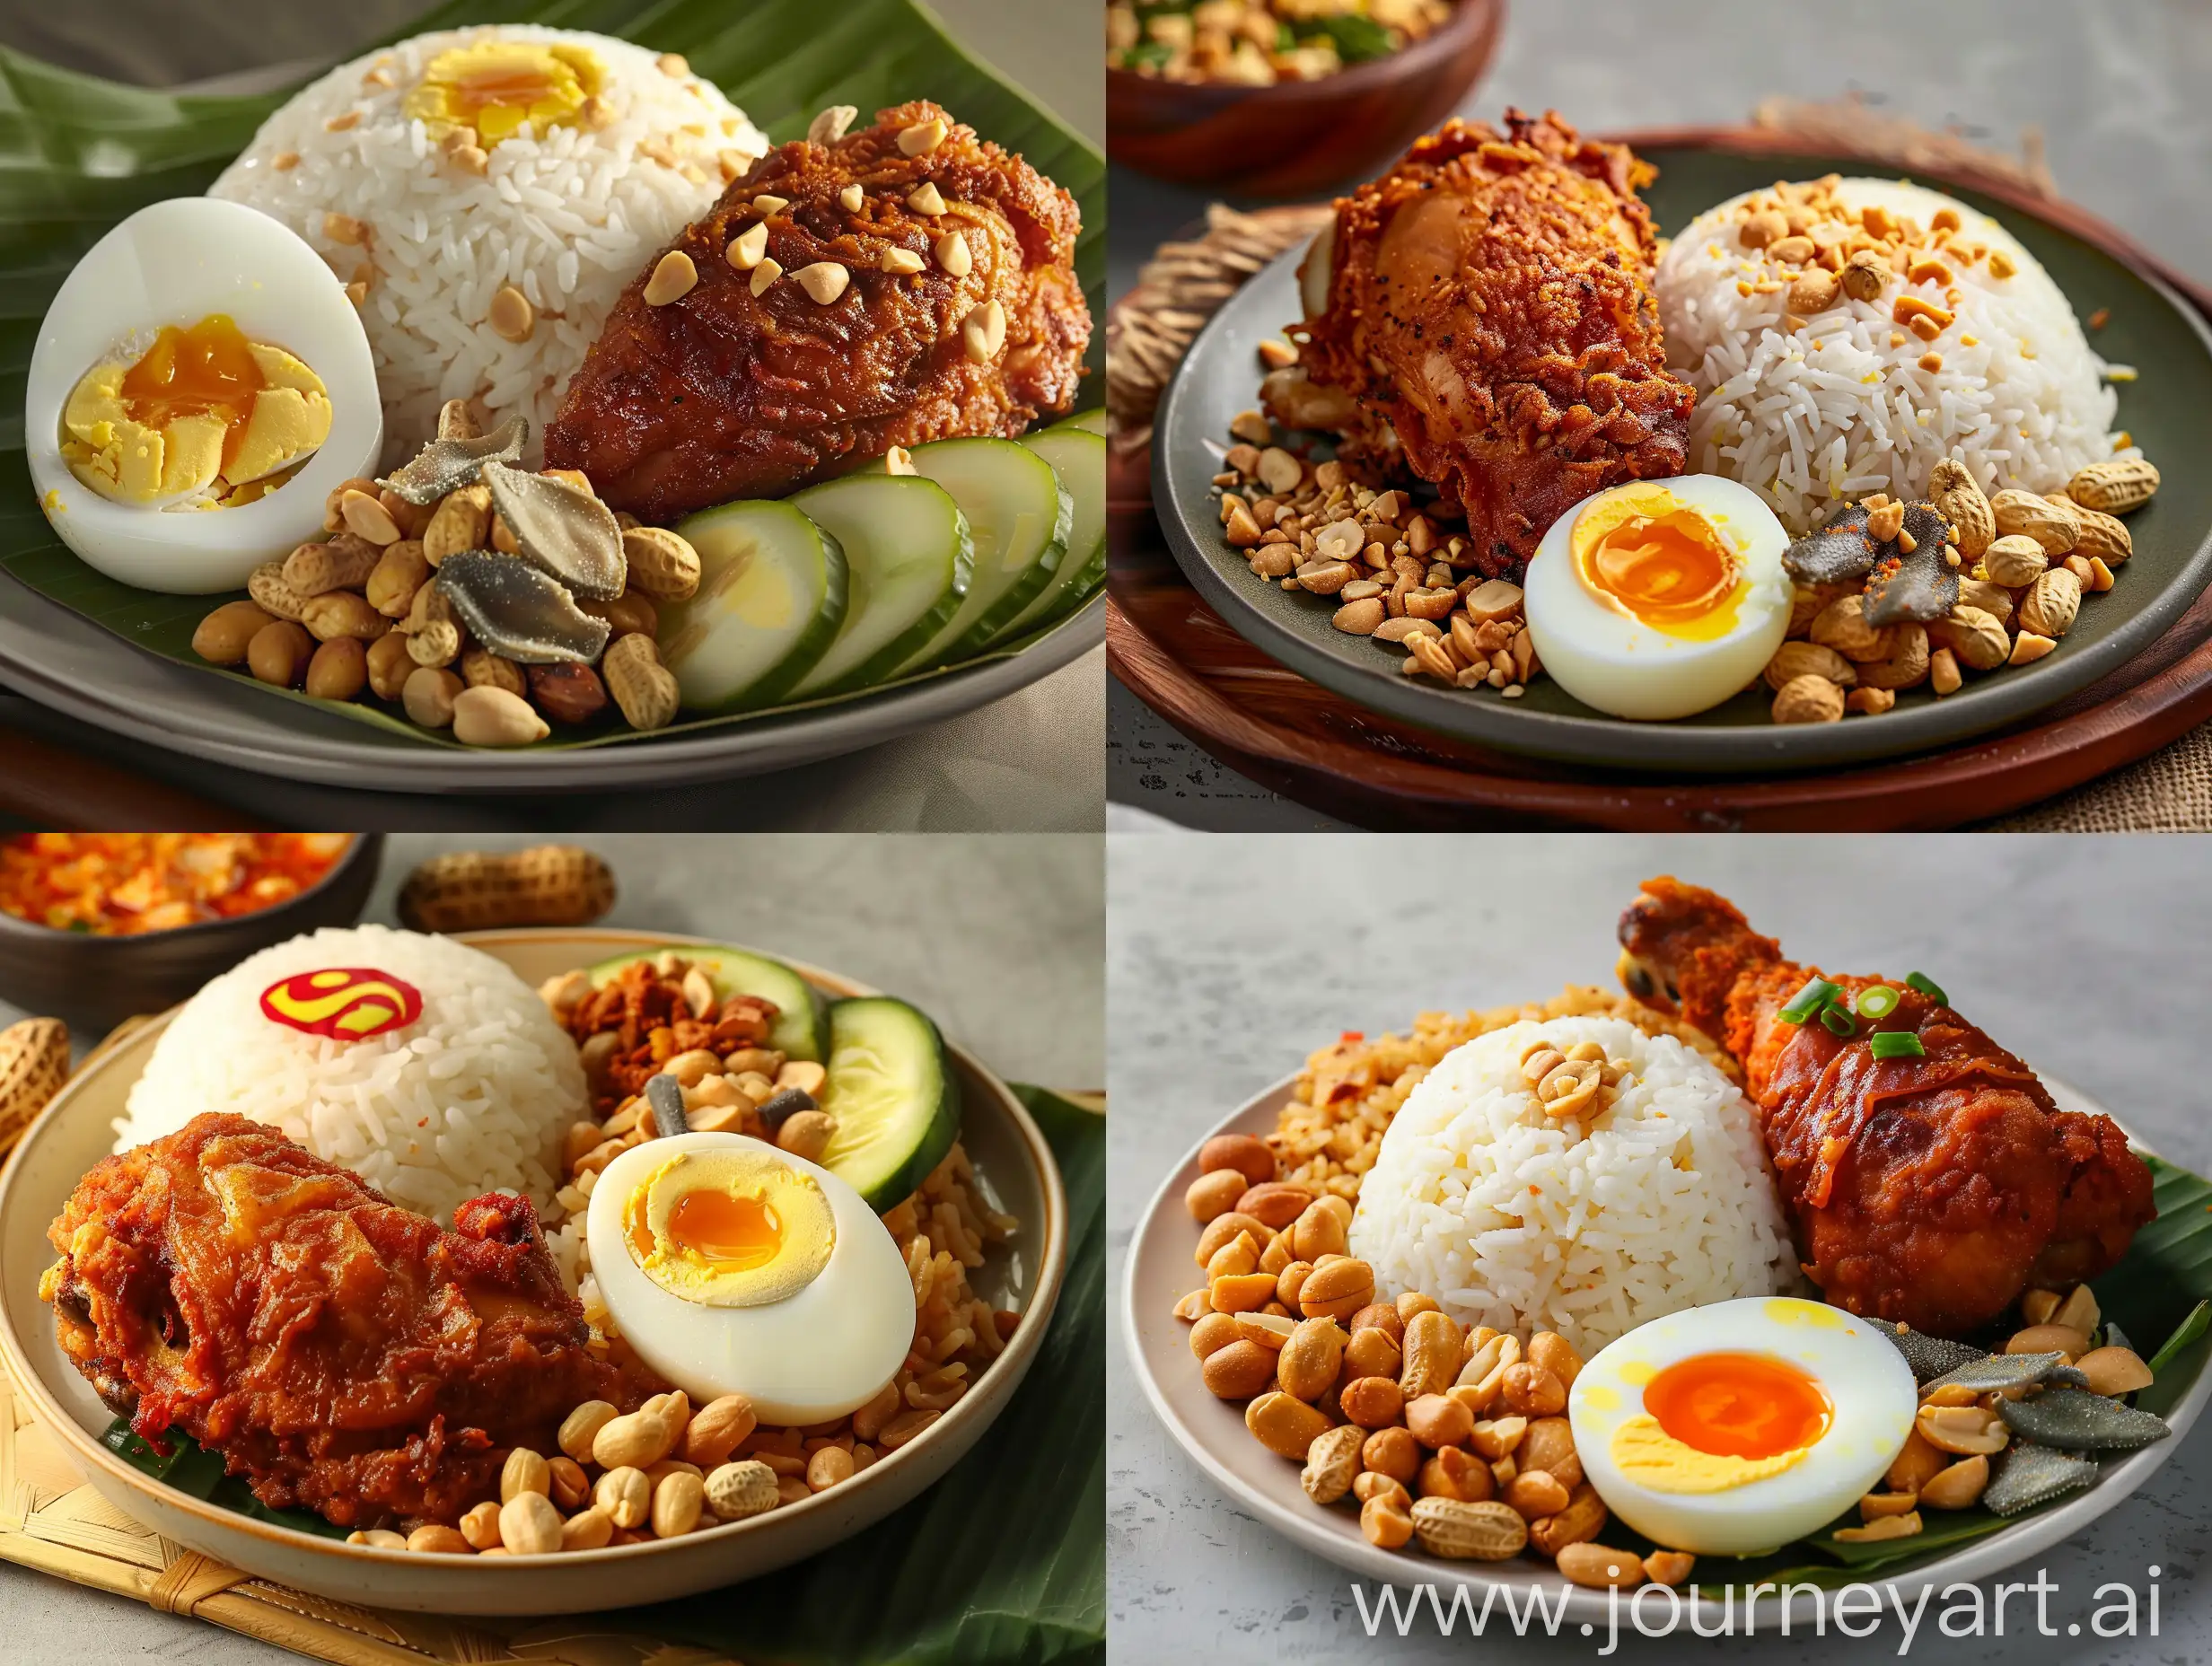 Create a high-resolution photograph of a traditional Nasi Lemak dish, artistically plated. The dish should feature a perfectly cooked portion of fragrant coconut rice. Accompany this with a half-boiled egg, a generous sprinkle of crispy peanuts and anchovies for a savory crunch. Include a piece of spice-fried chicken thigh, golden and juicy, as the centerpiece. Ensure the presentation is vibrant, with each component distinctly visible and attractively arranged to highlight the rich textures and colors. The background should be neutral to emphasize the vividness of the meal, enhancing its visual appeal.